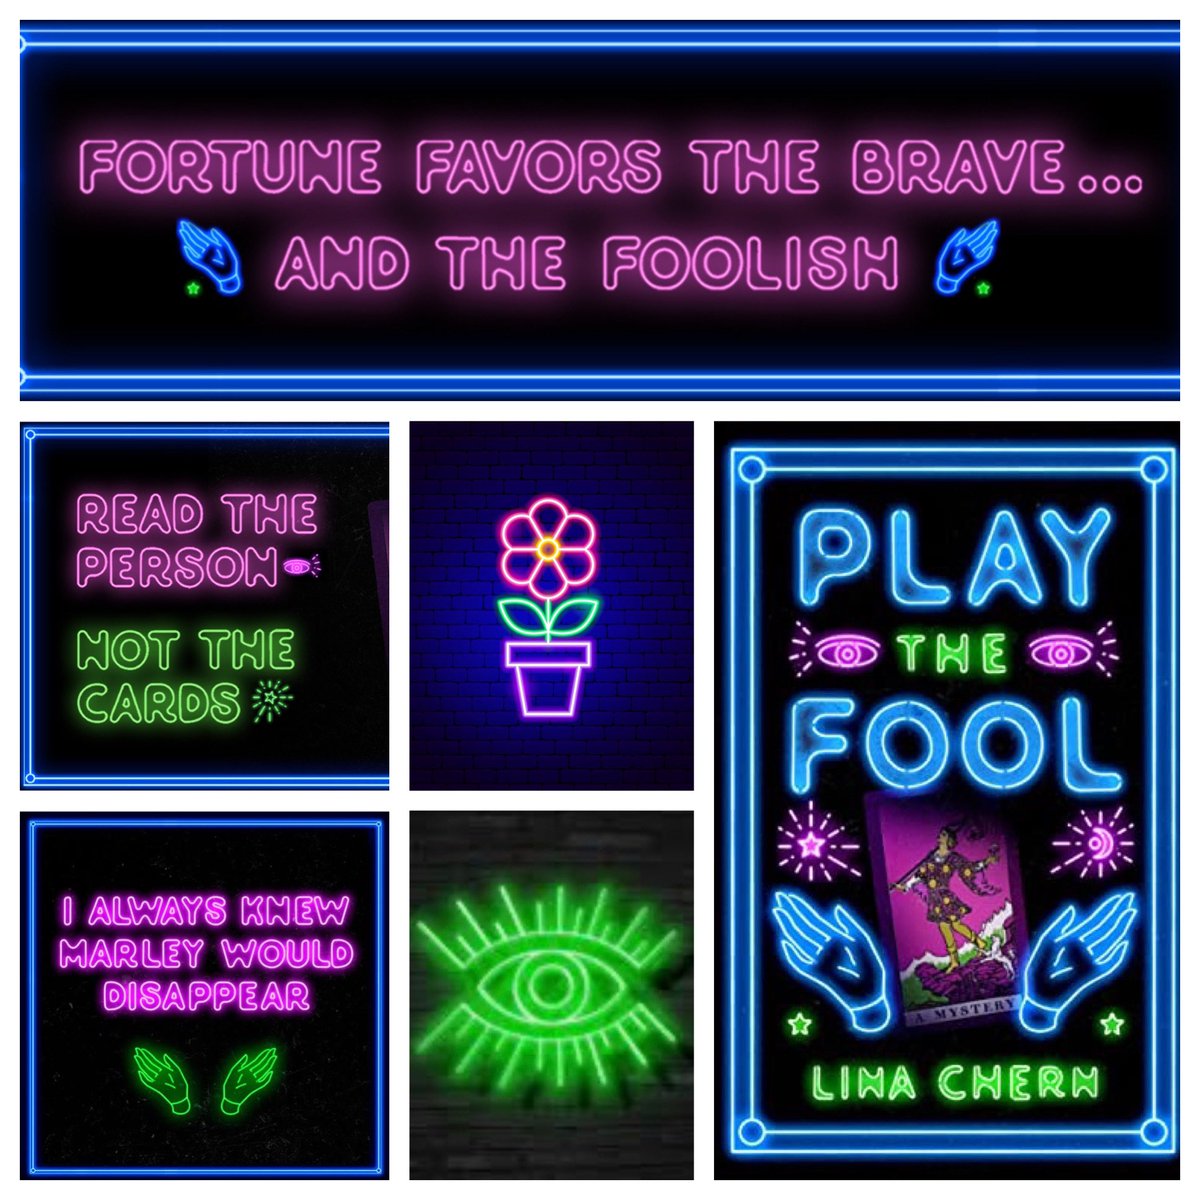 ⭐️⭐️⭐️⭐️⭐️ for an amazing debut #PlayTheFool , by @linachernwrites ! Lead character Katie True is clever and witty and deserves a full series! #BantamBooks #NetGalley #BookTwitter